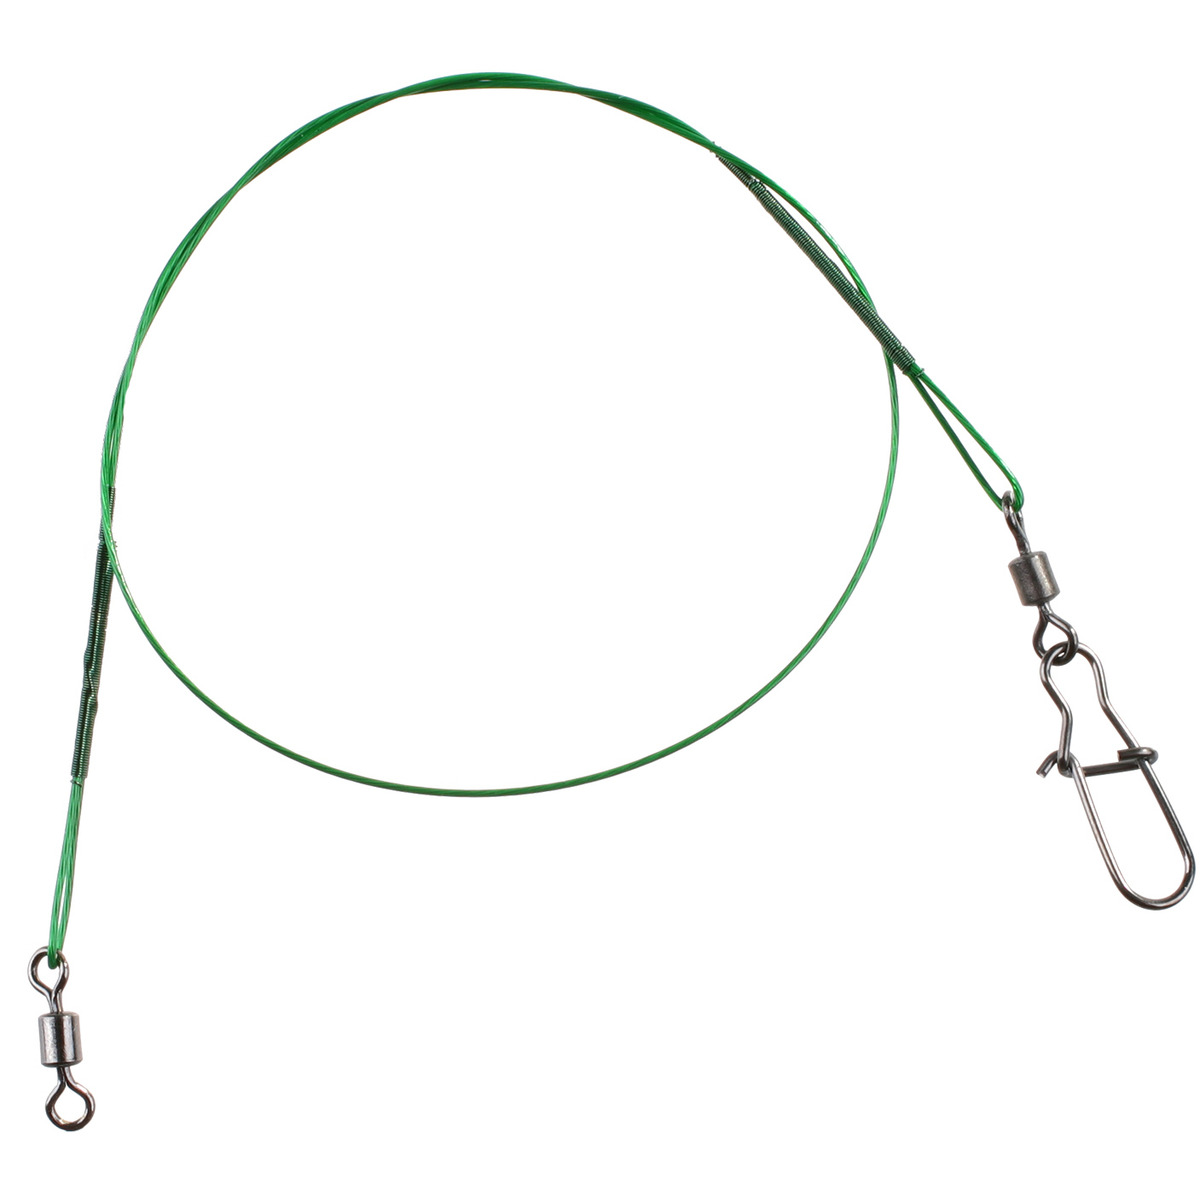 Mikado Steel Leaderwith Swivel And Double Treble Hook - 35 cm / 15kg  GREEN